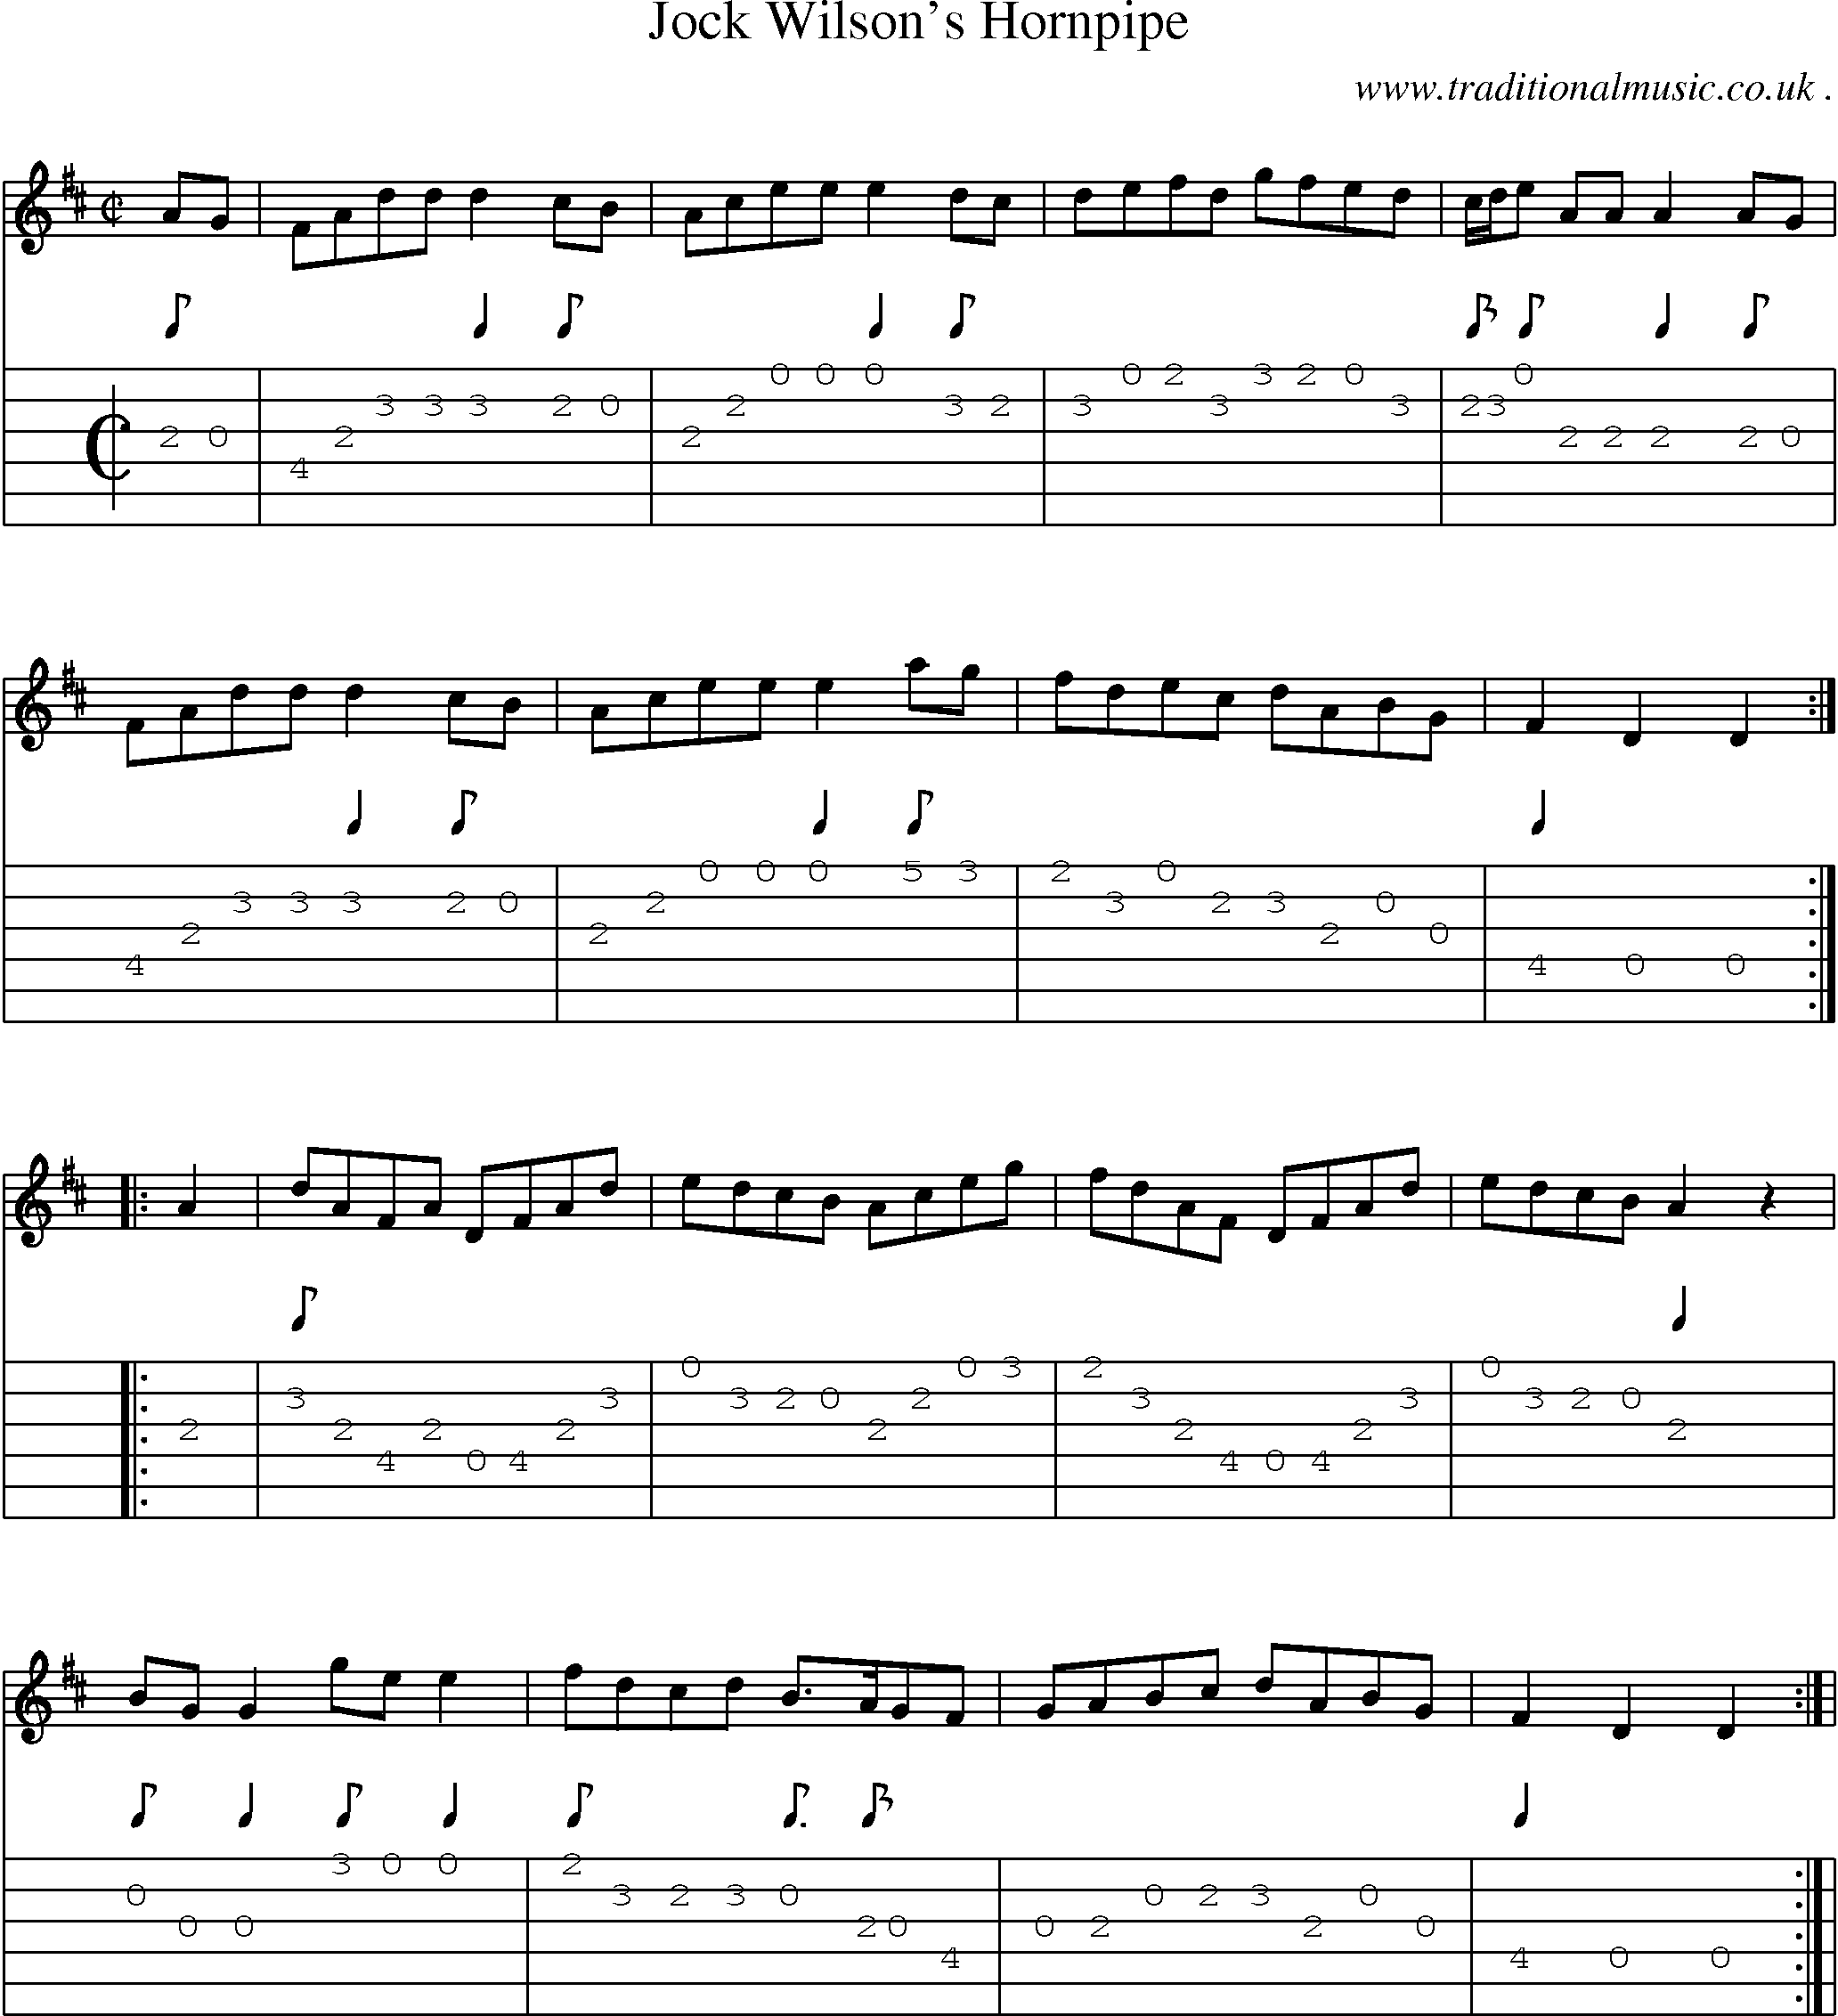 Sheet-Music and Guitar Tabs for Jock Wilsons Hornpipe